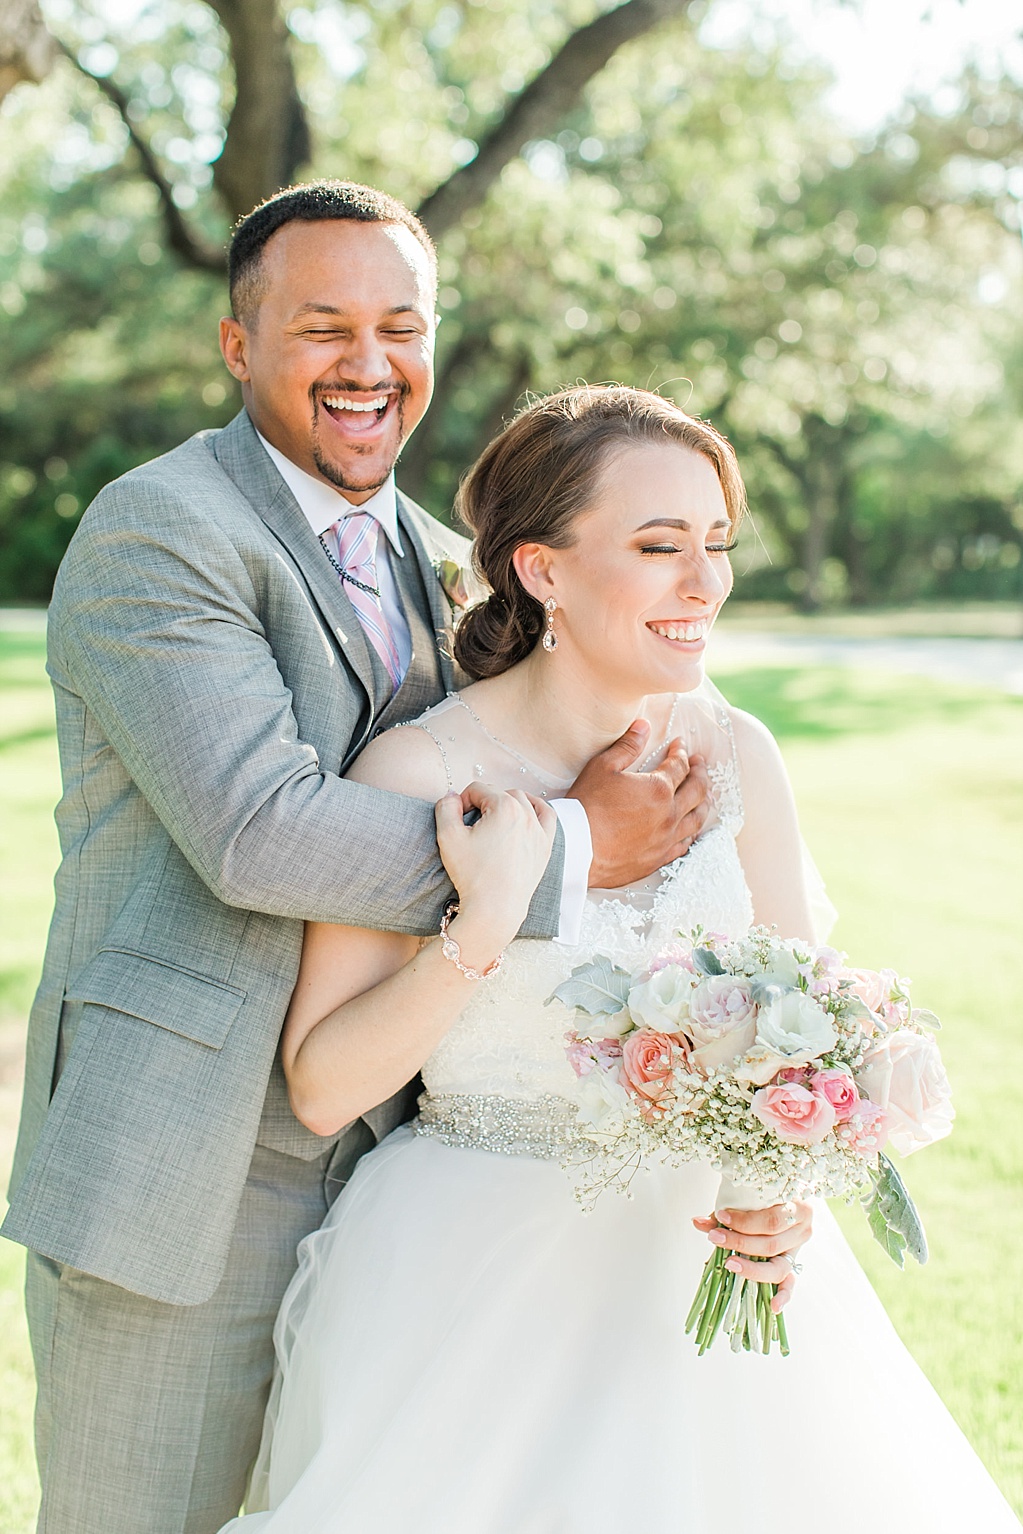 A Blush Vintage Summer Wedding at The Chandelier of Gruene in New Braunfels Texas by Allison Jeffers Photography 0113